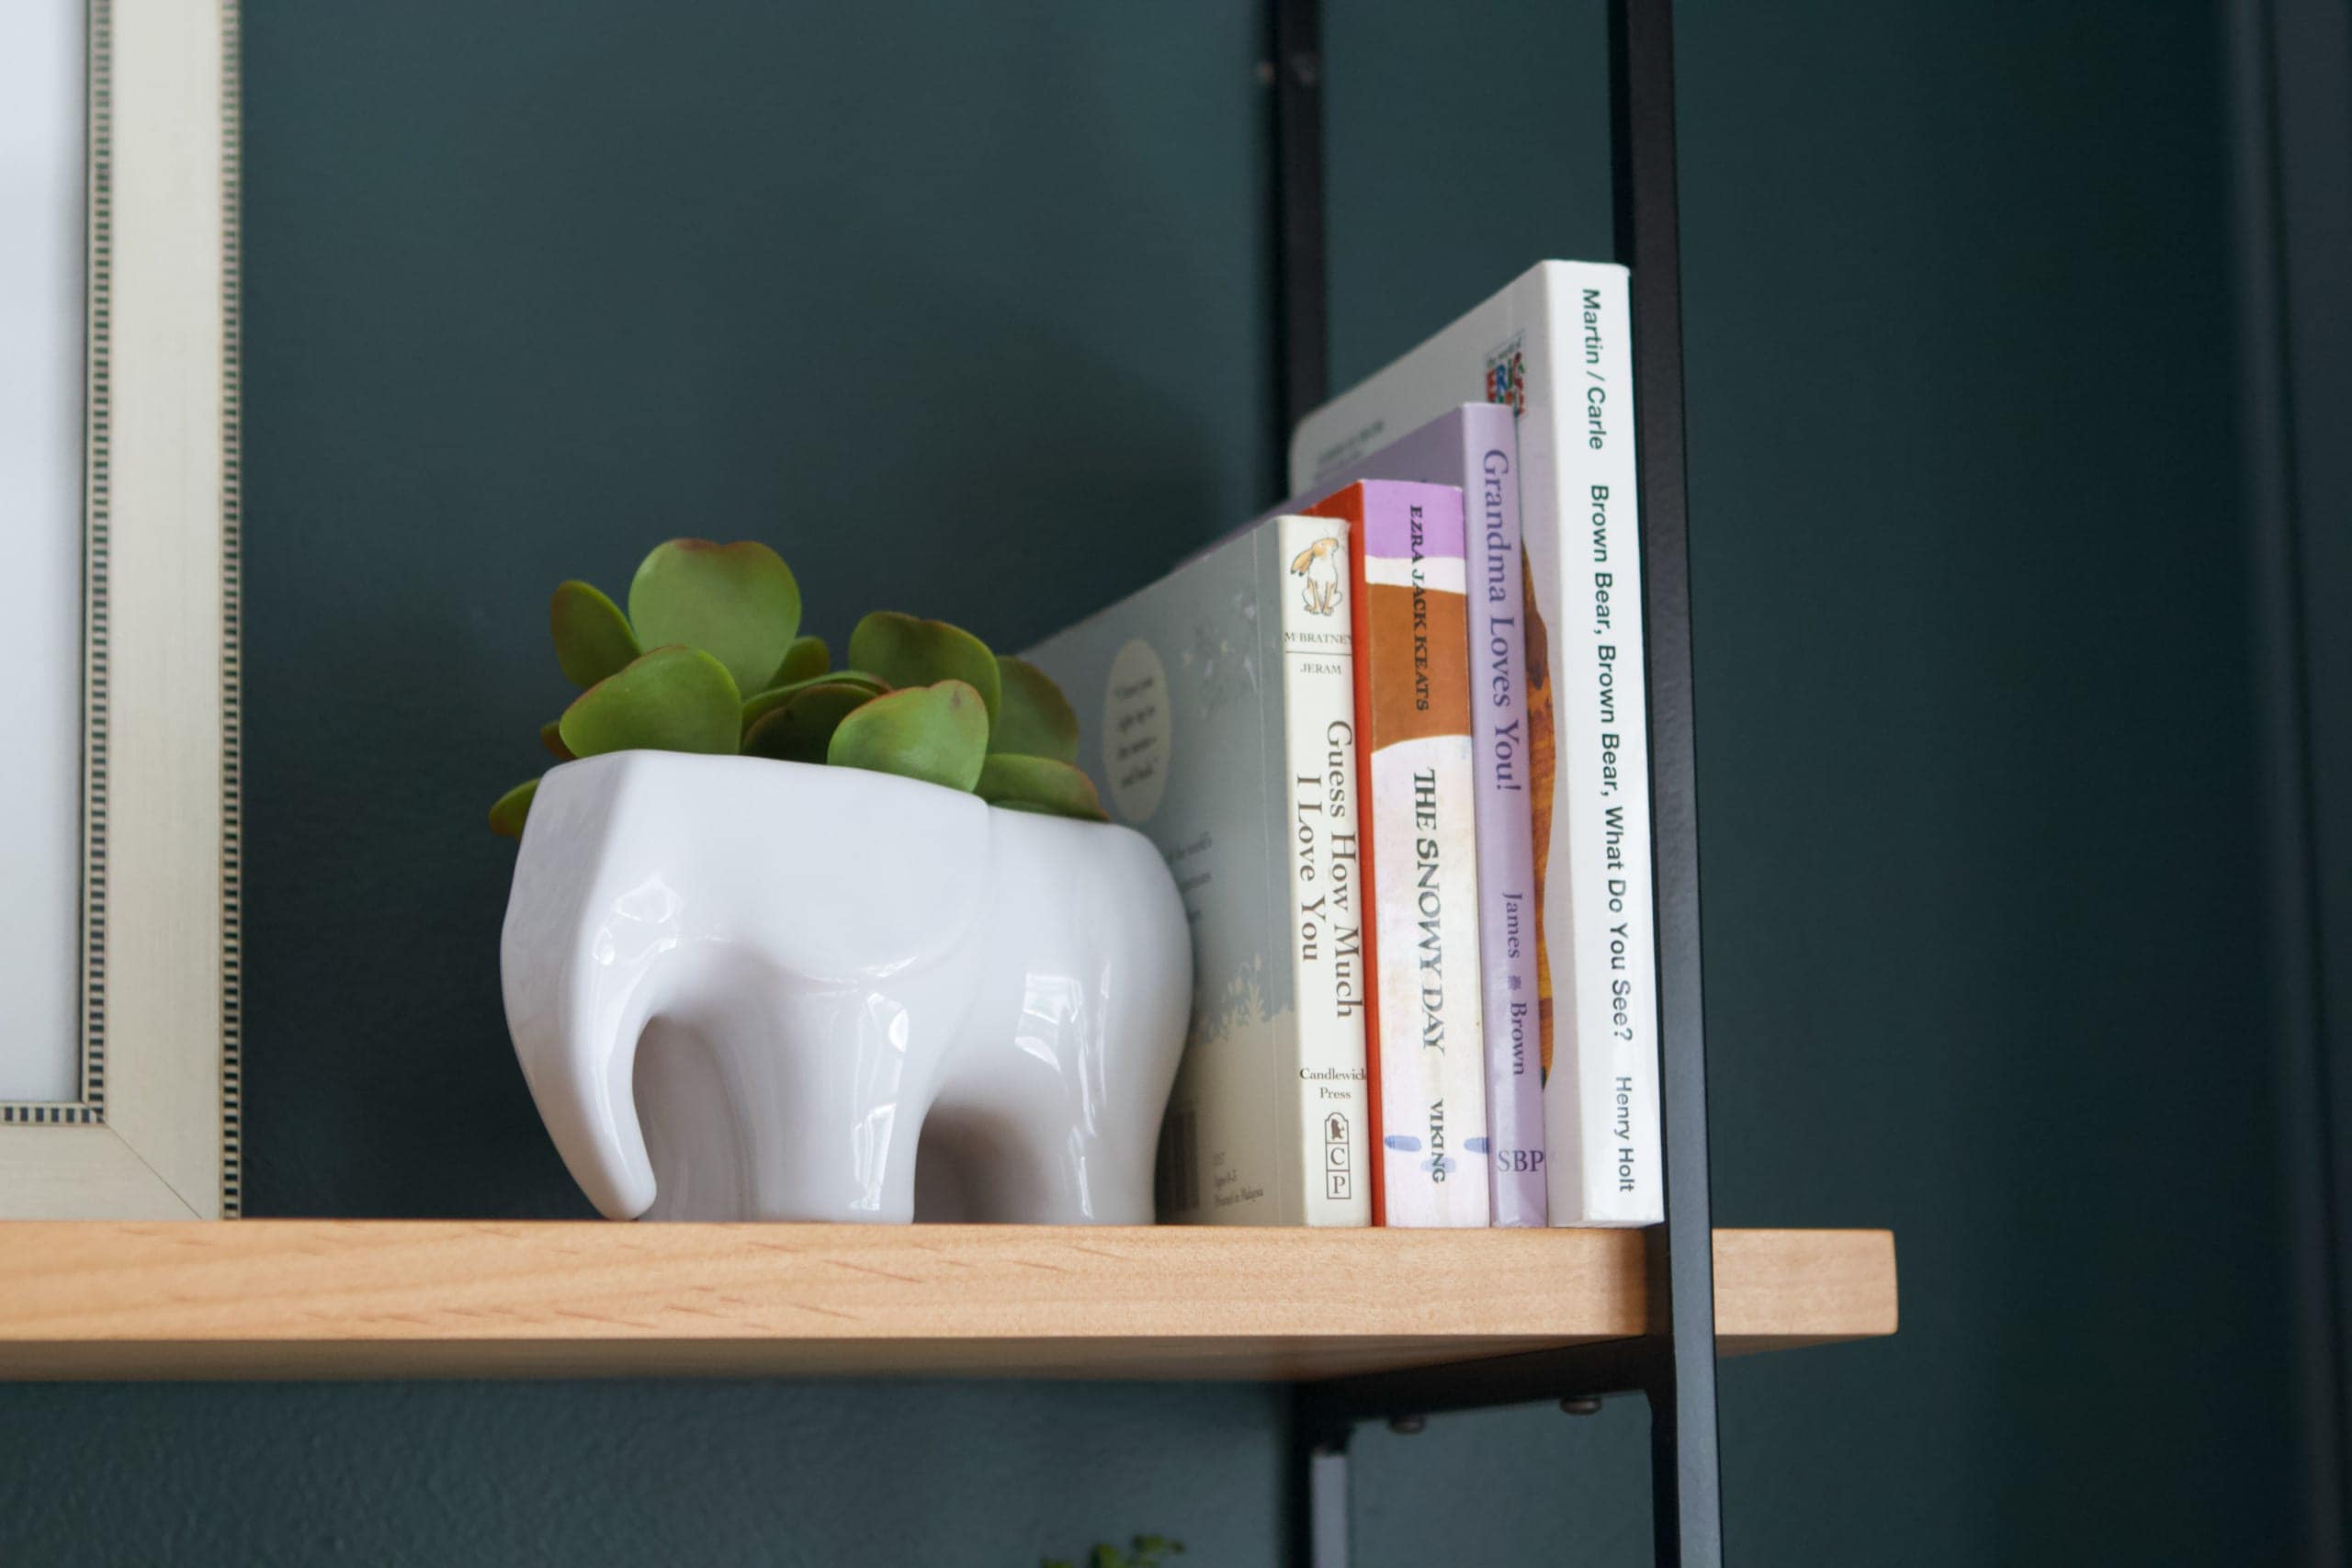 Adding cute books and planters to shelves